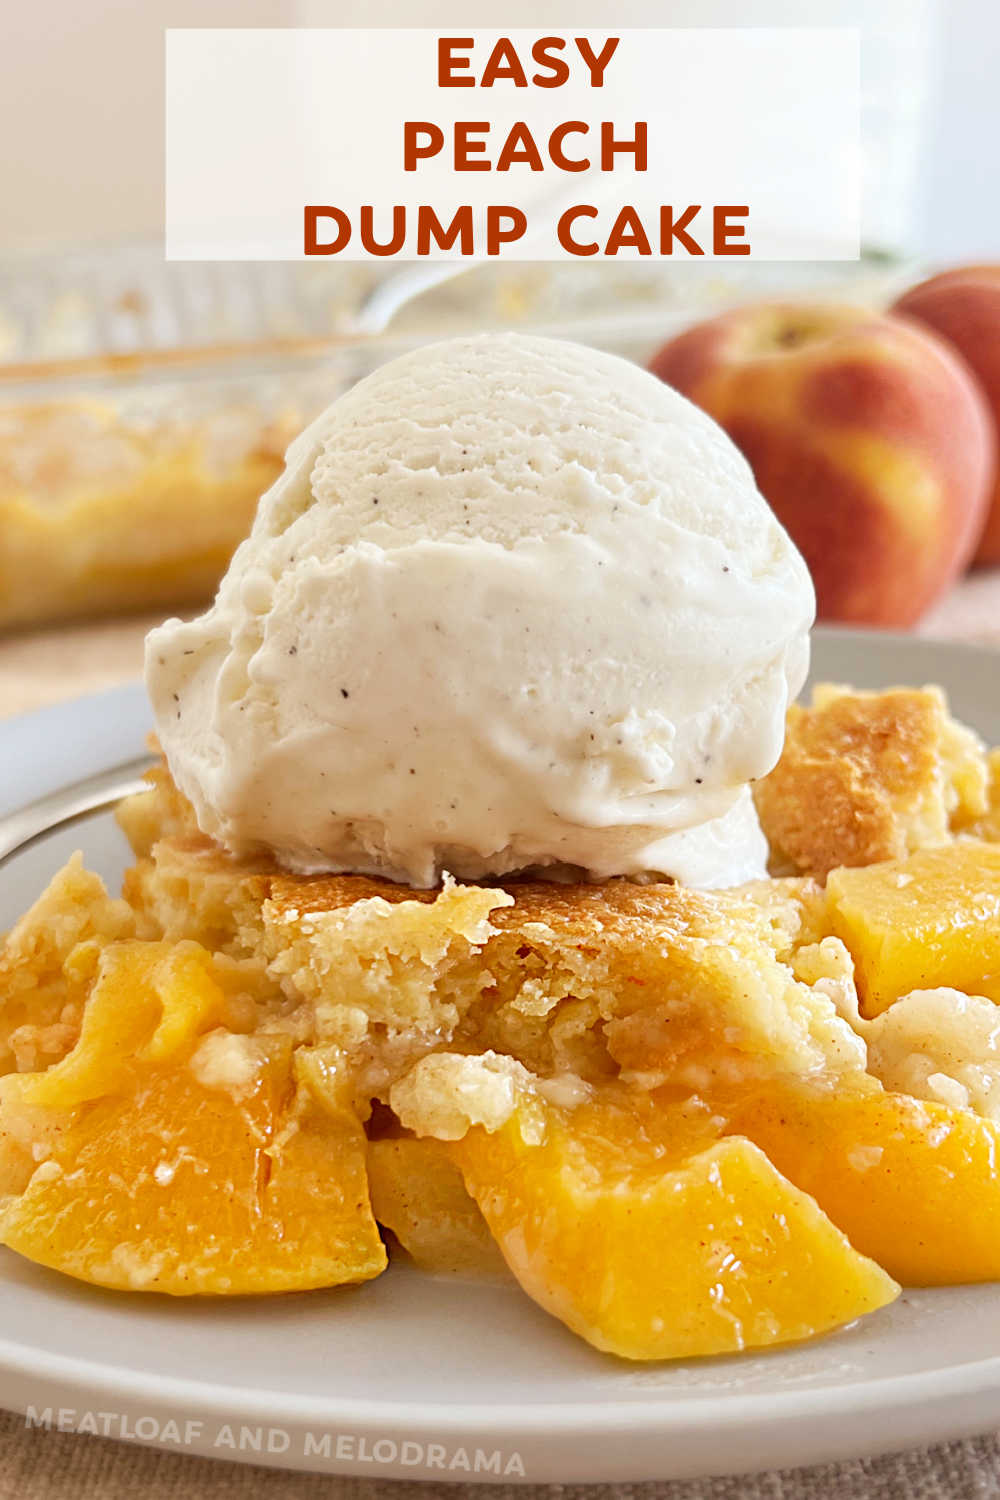 This Easy Peach Dump Cake recipe is made with canned peaches, cinnamon, cake mix and butter. An easy dessert recipe and a family favorite. Peach lovers love this delicious dessert! via @meamel